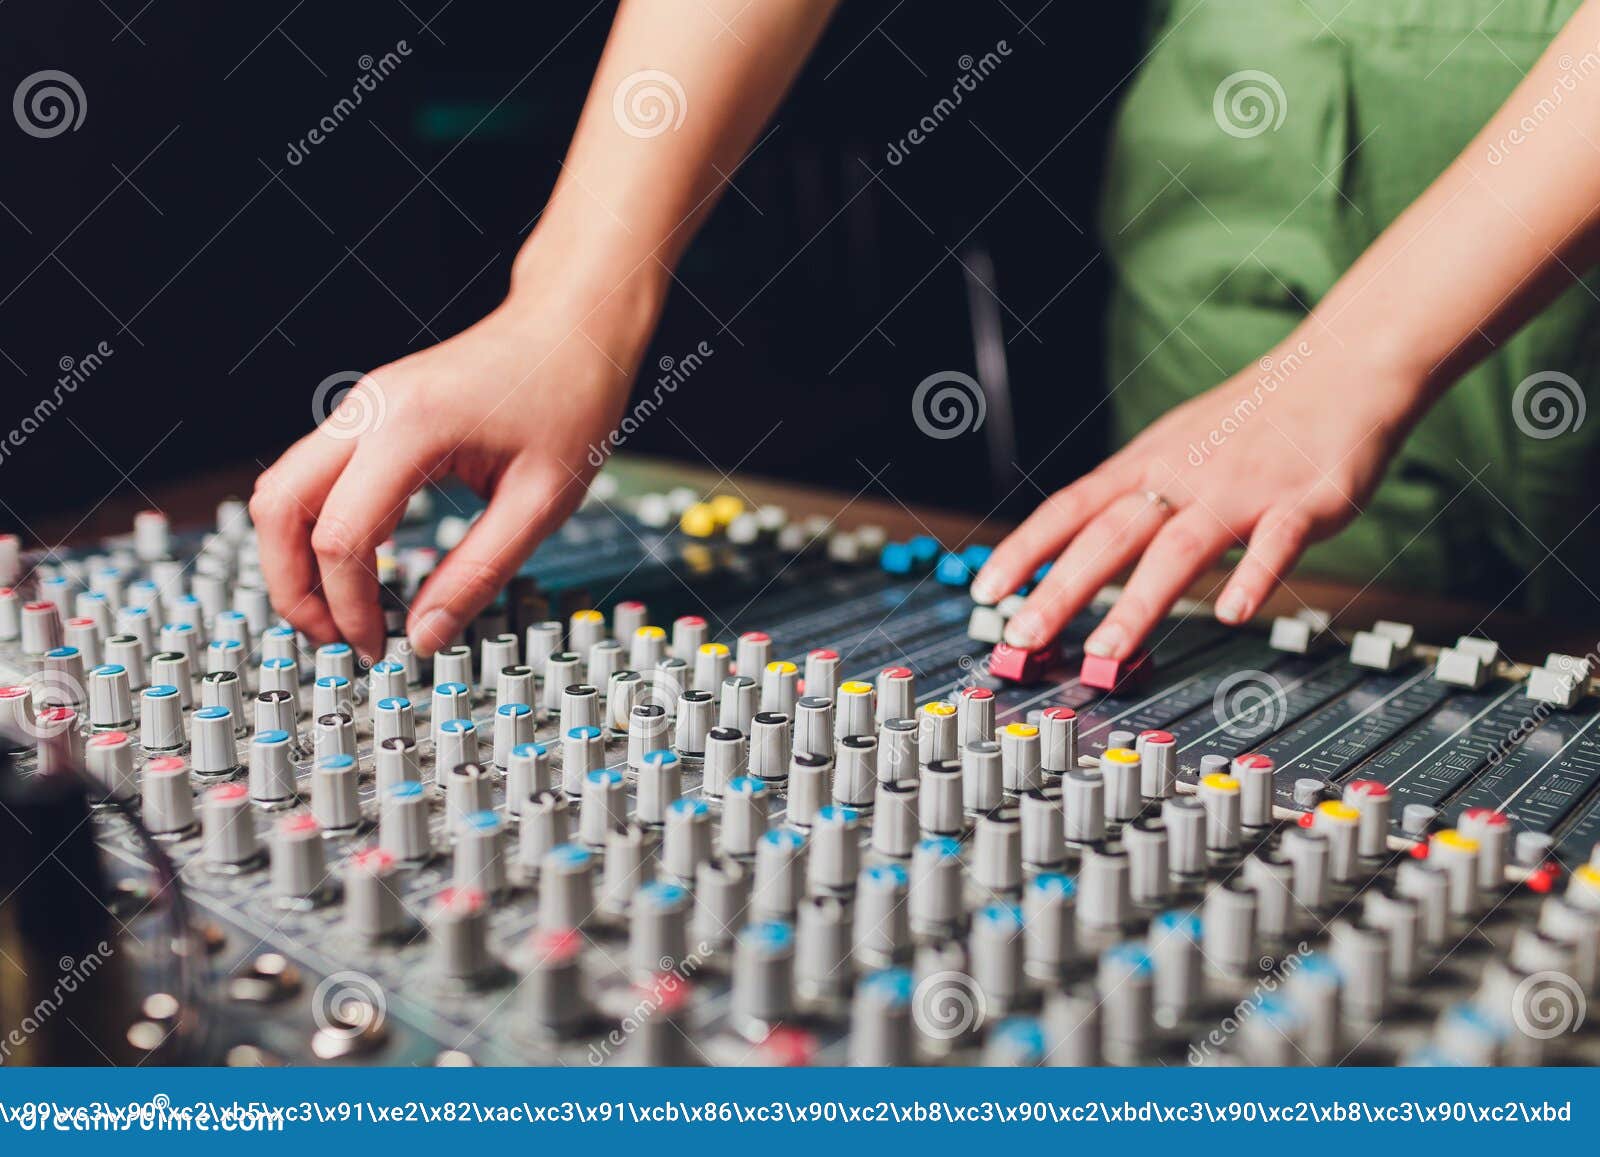 The Mixer. Remote for Sound Recording. Sound Engineer at Work in the ...